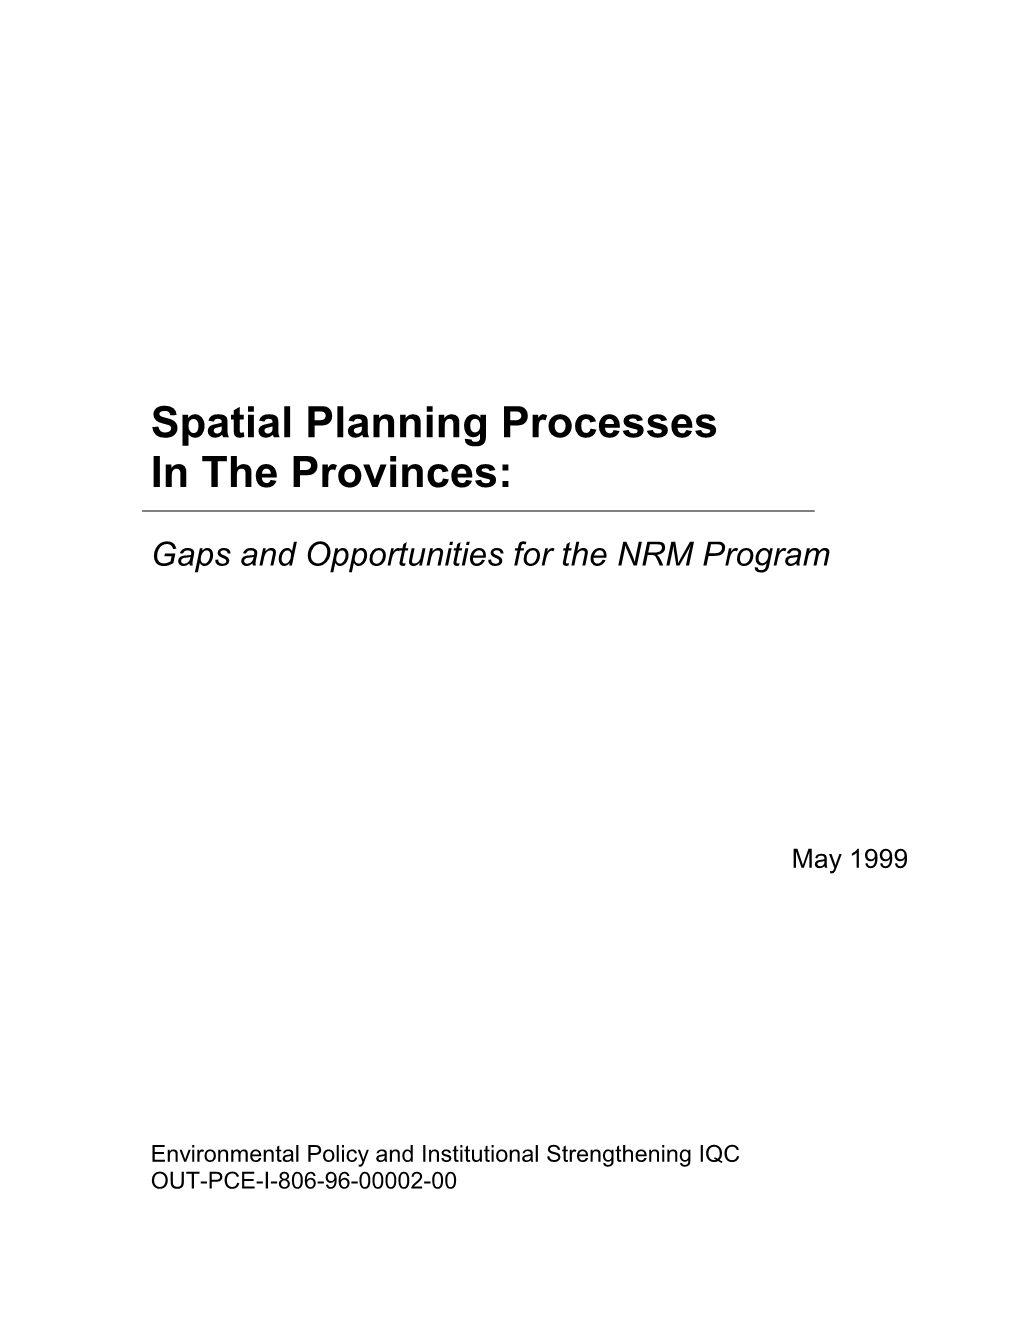 Spatial Planning Processes in the Provinces